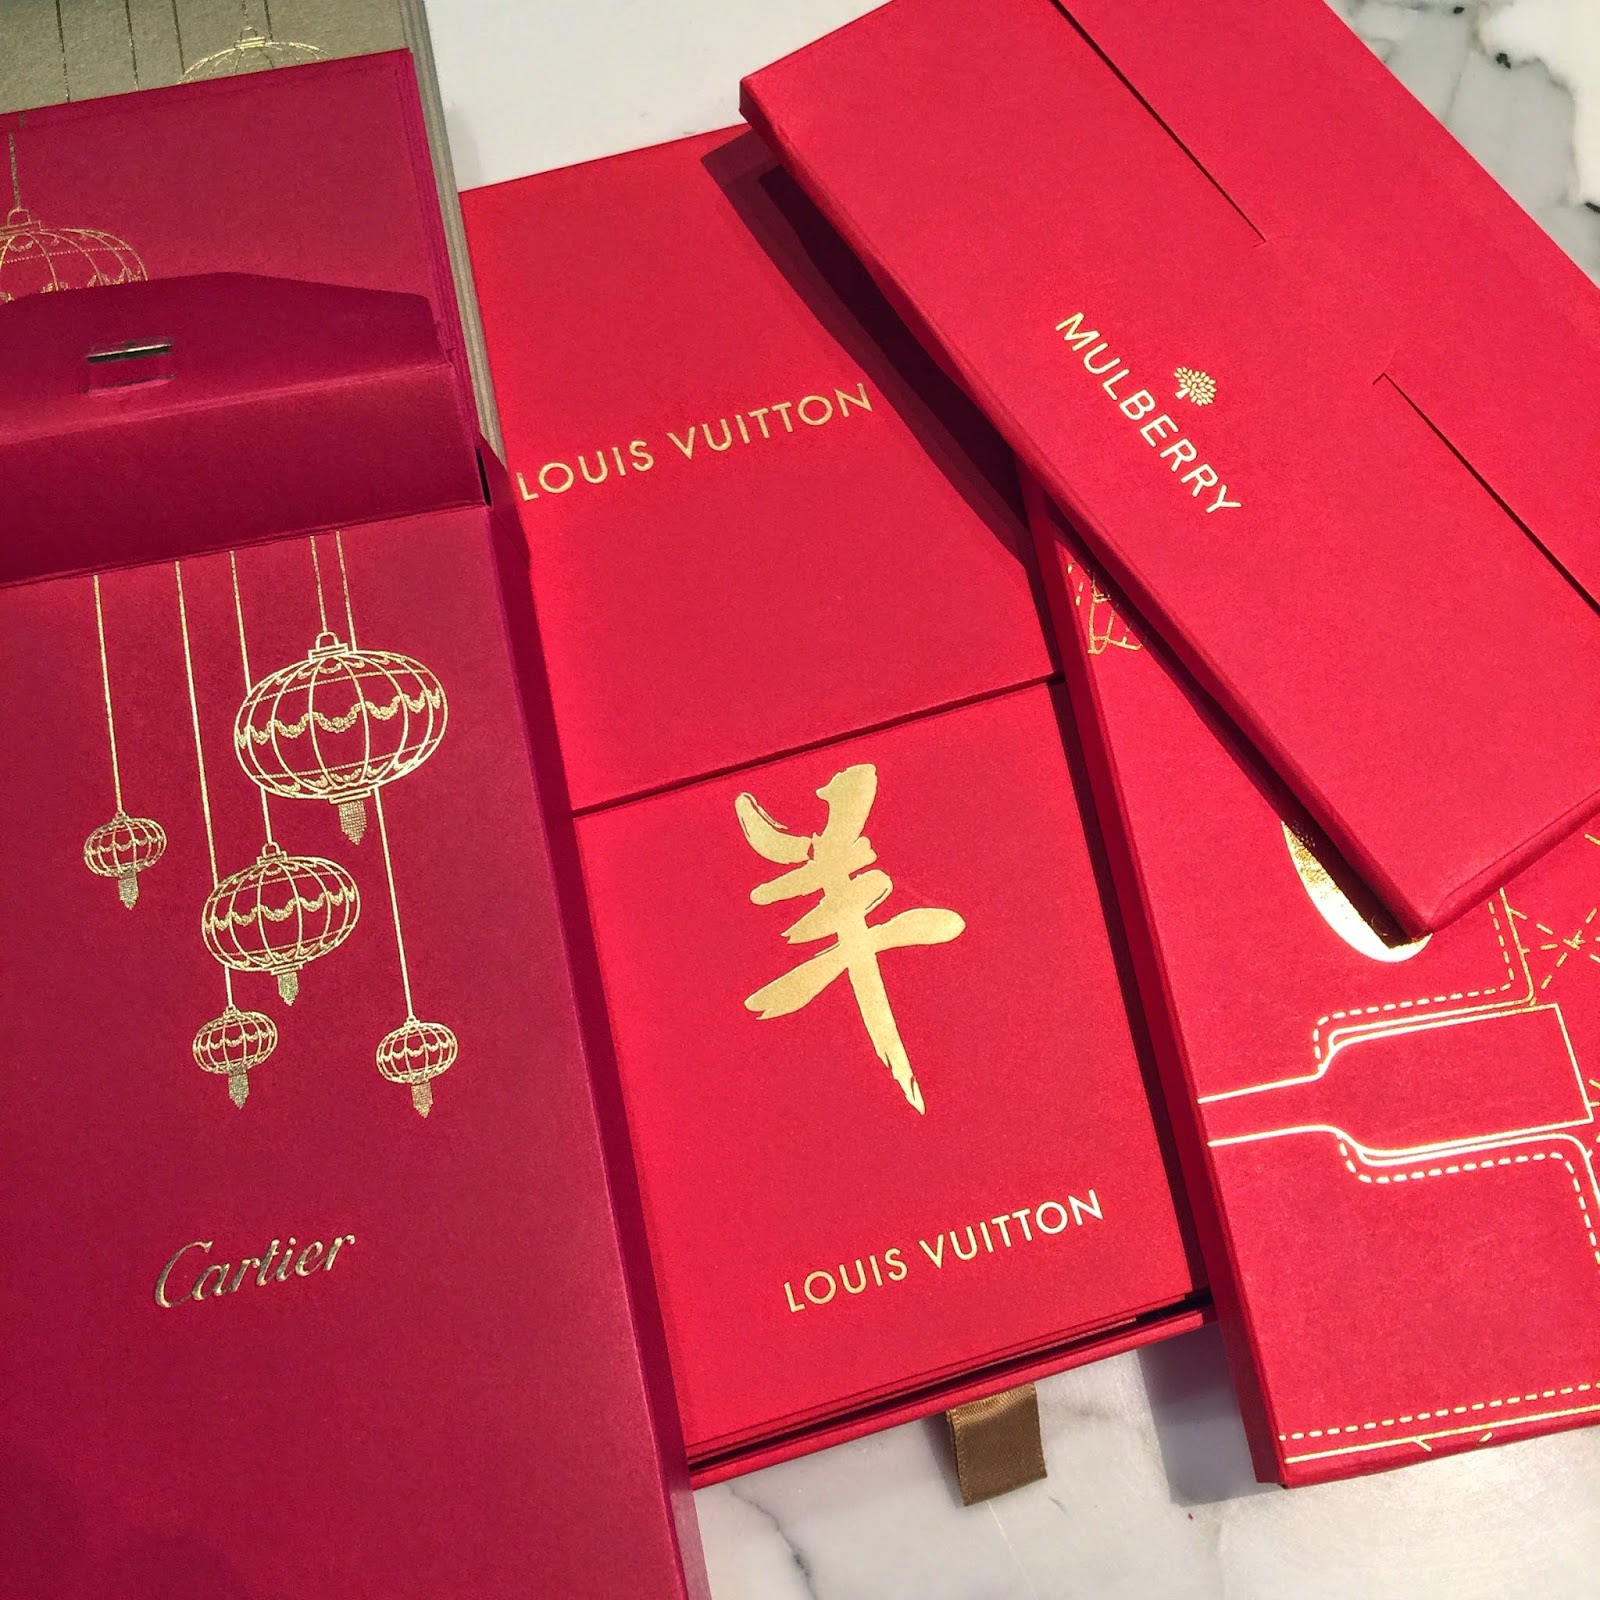 Globalgoodfood Designer Hong Bao Red Packets Louis Vuitton Mulberry And Cartier